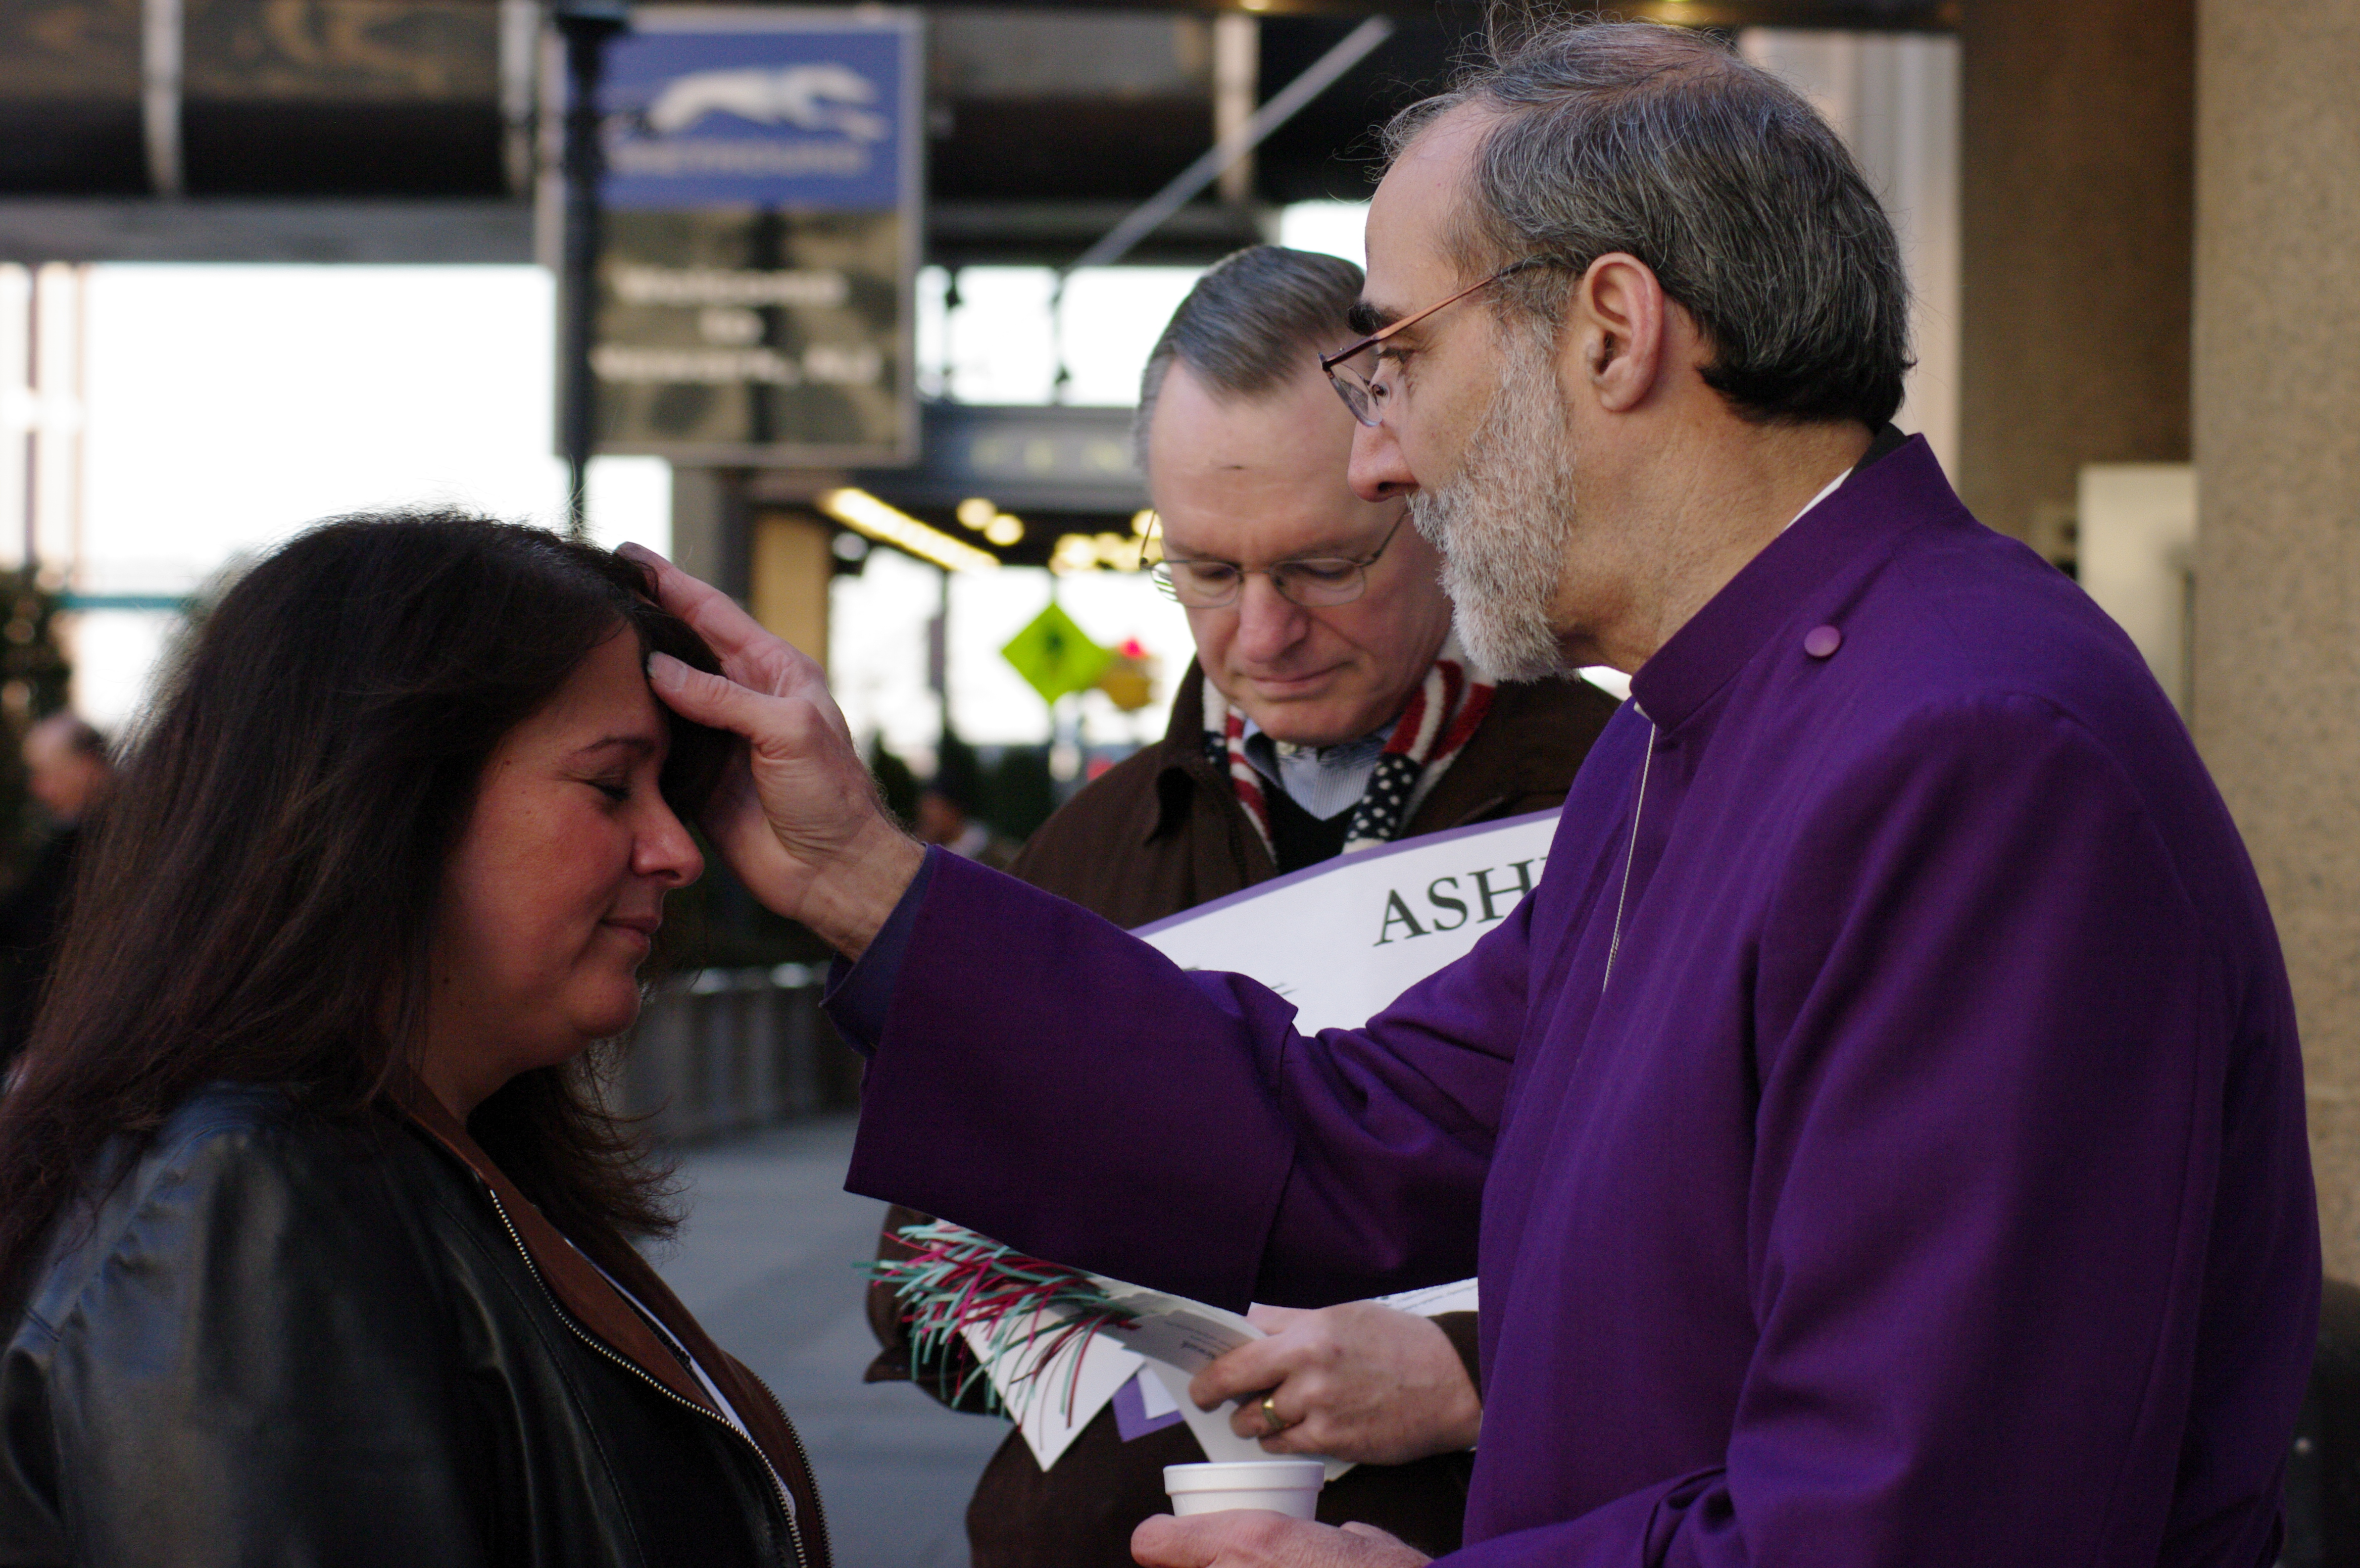 Bishop Mark Beckwith giving Ashes to Go at Newark Penn Station